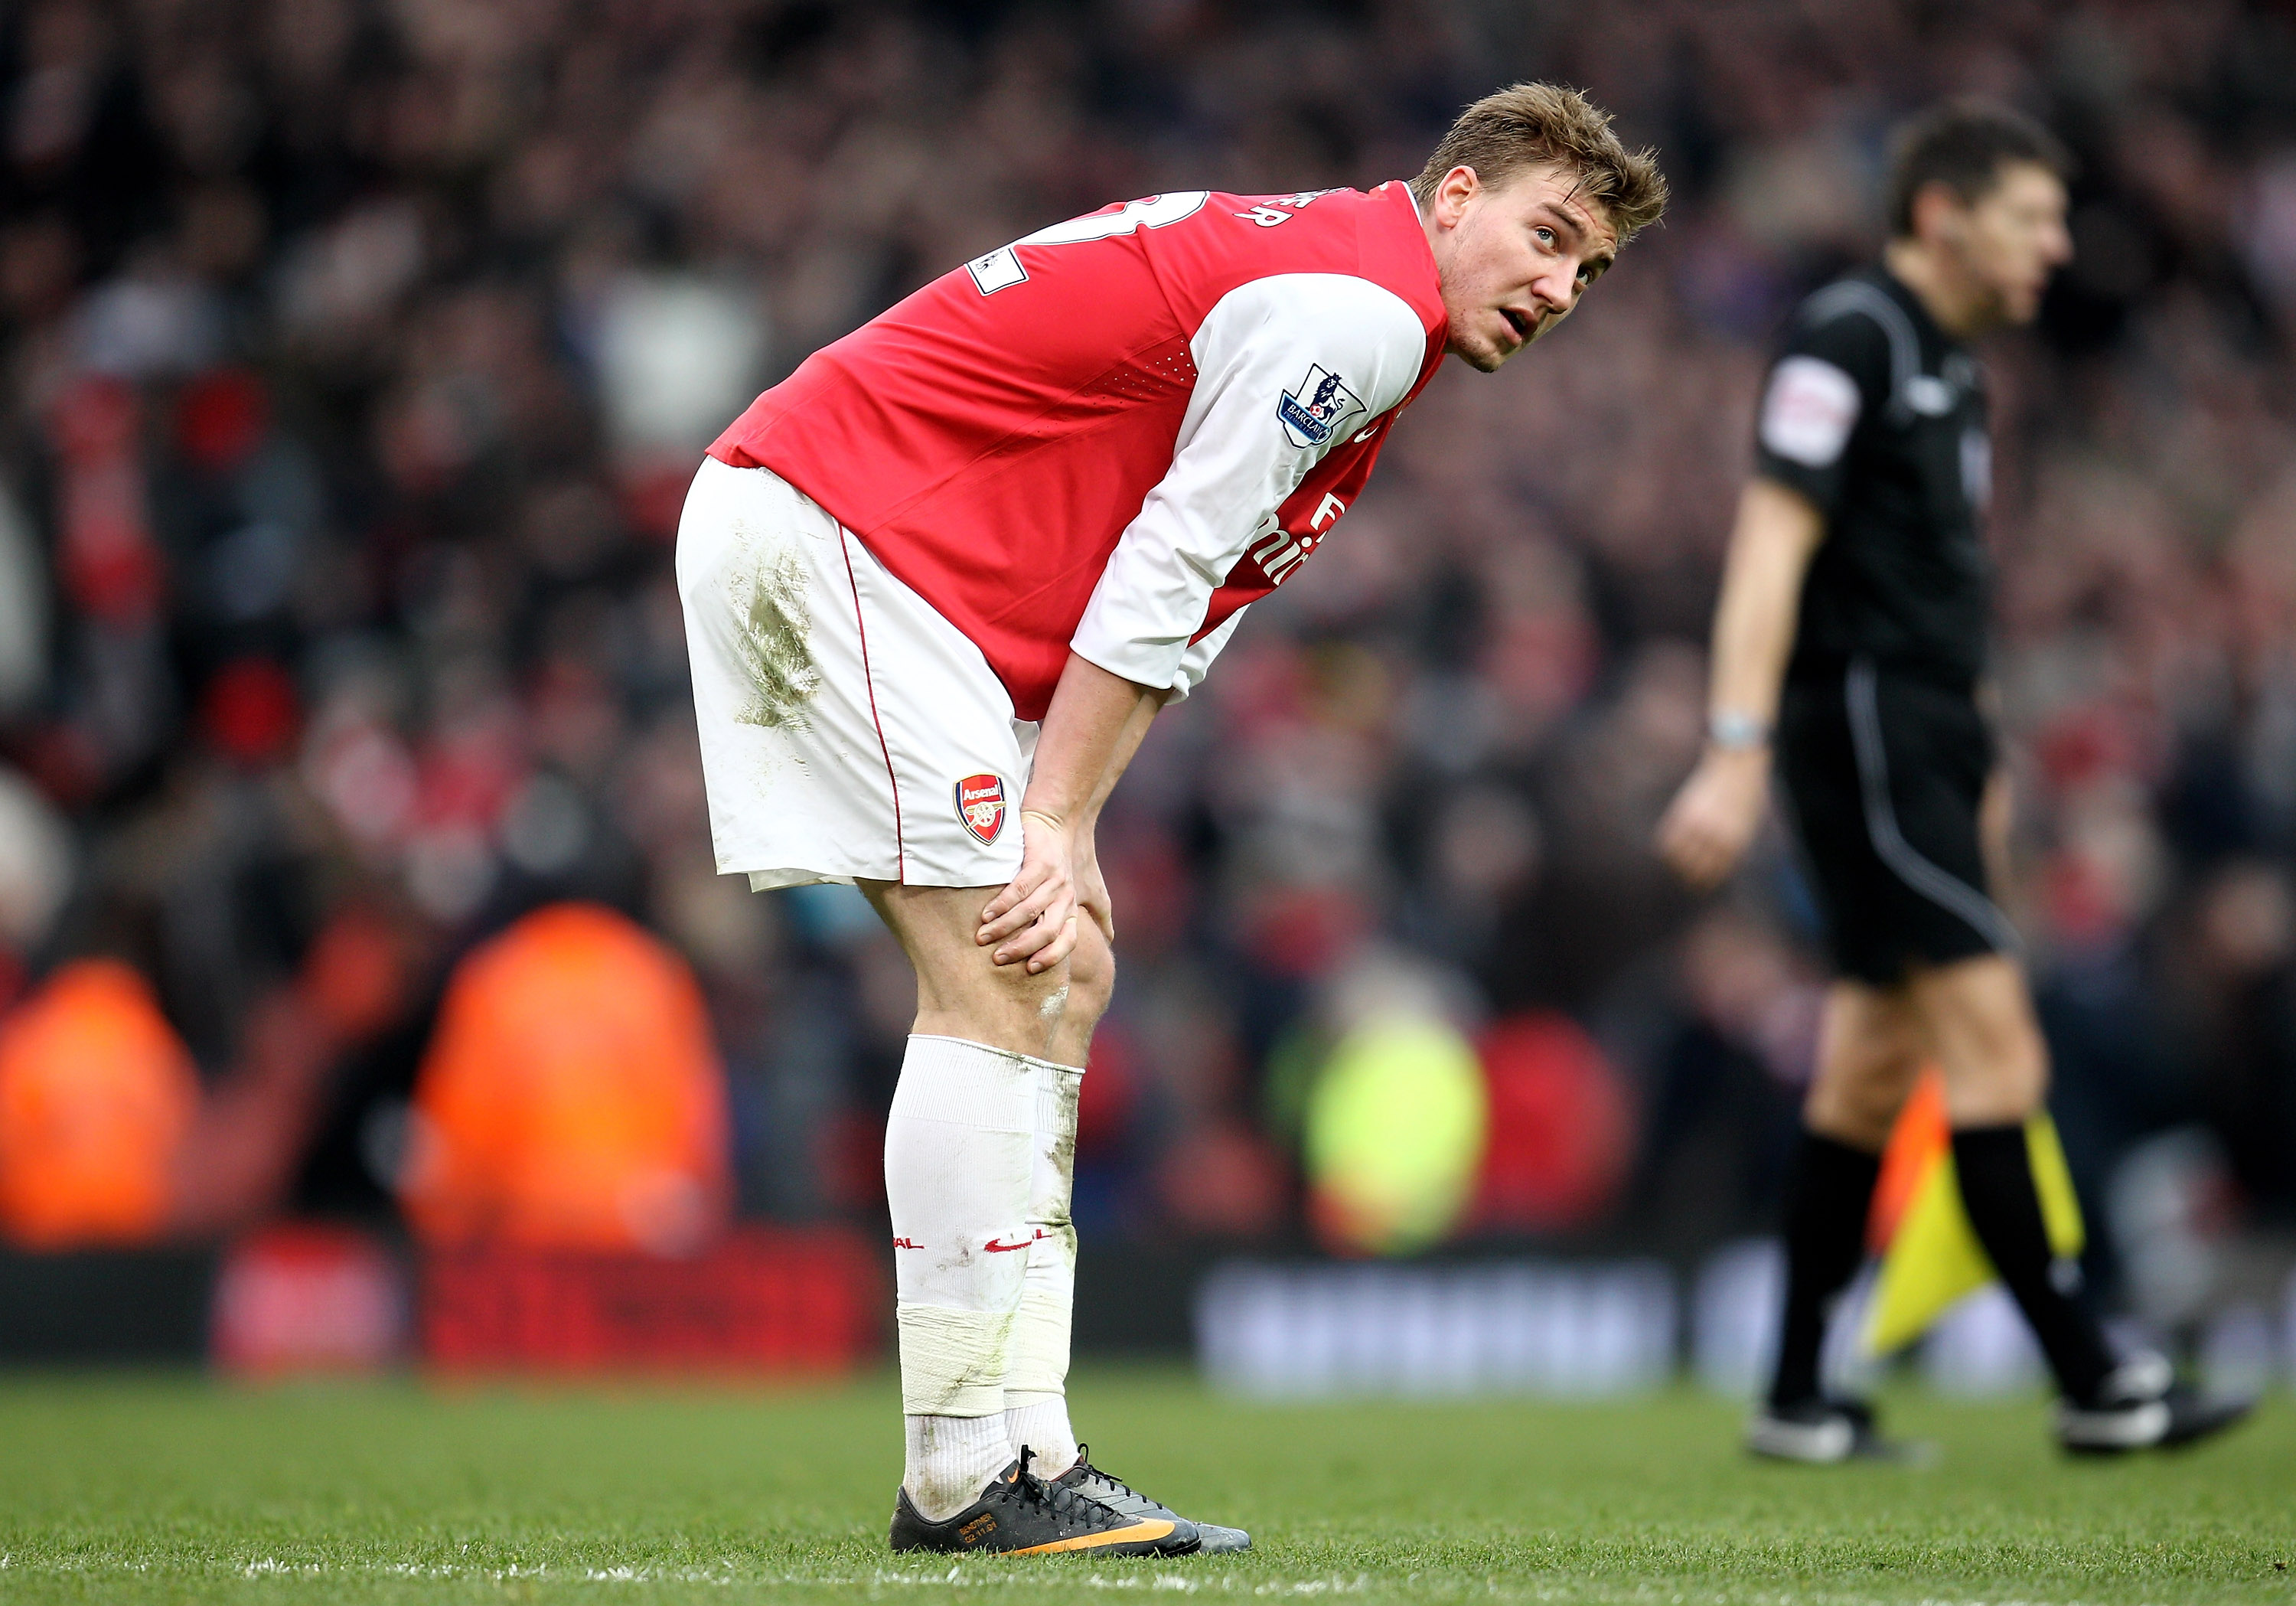 LONDON, ENGLAND - MARCH 05:  Nicklas Bendtner of Arsenal shows his disappointment at the final whistle during the Barclays Premier League match between Arsenal and Sunderland at Emirates Stadium on March 5, 2011 in London, England.  (Photo by Paul Gilham/